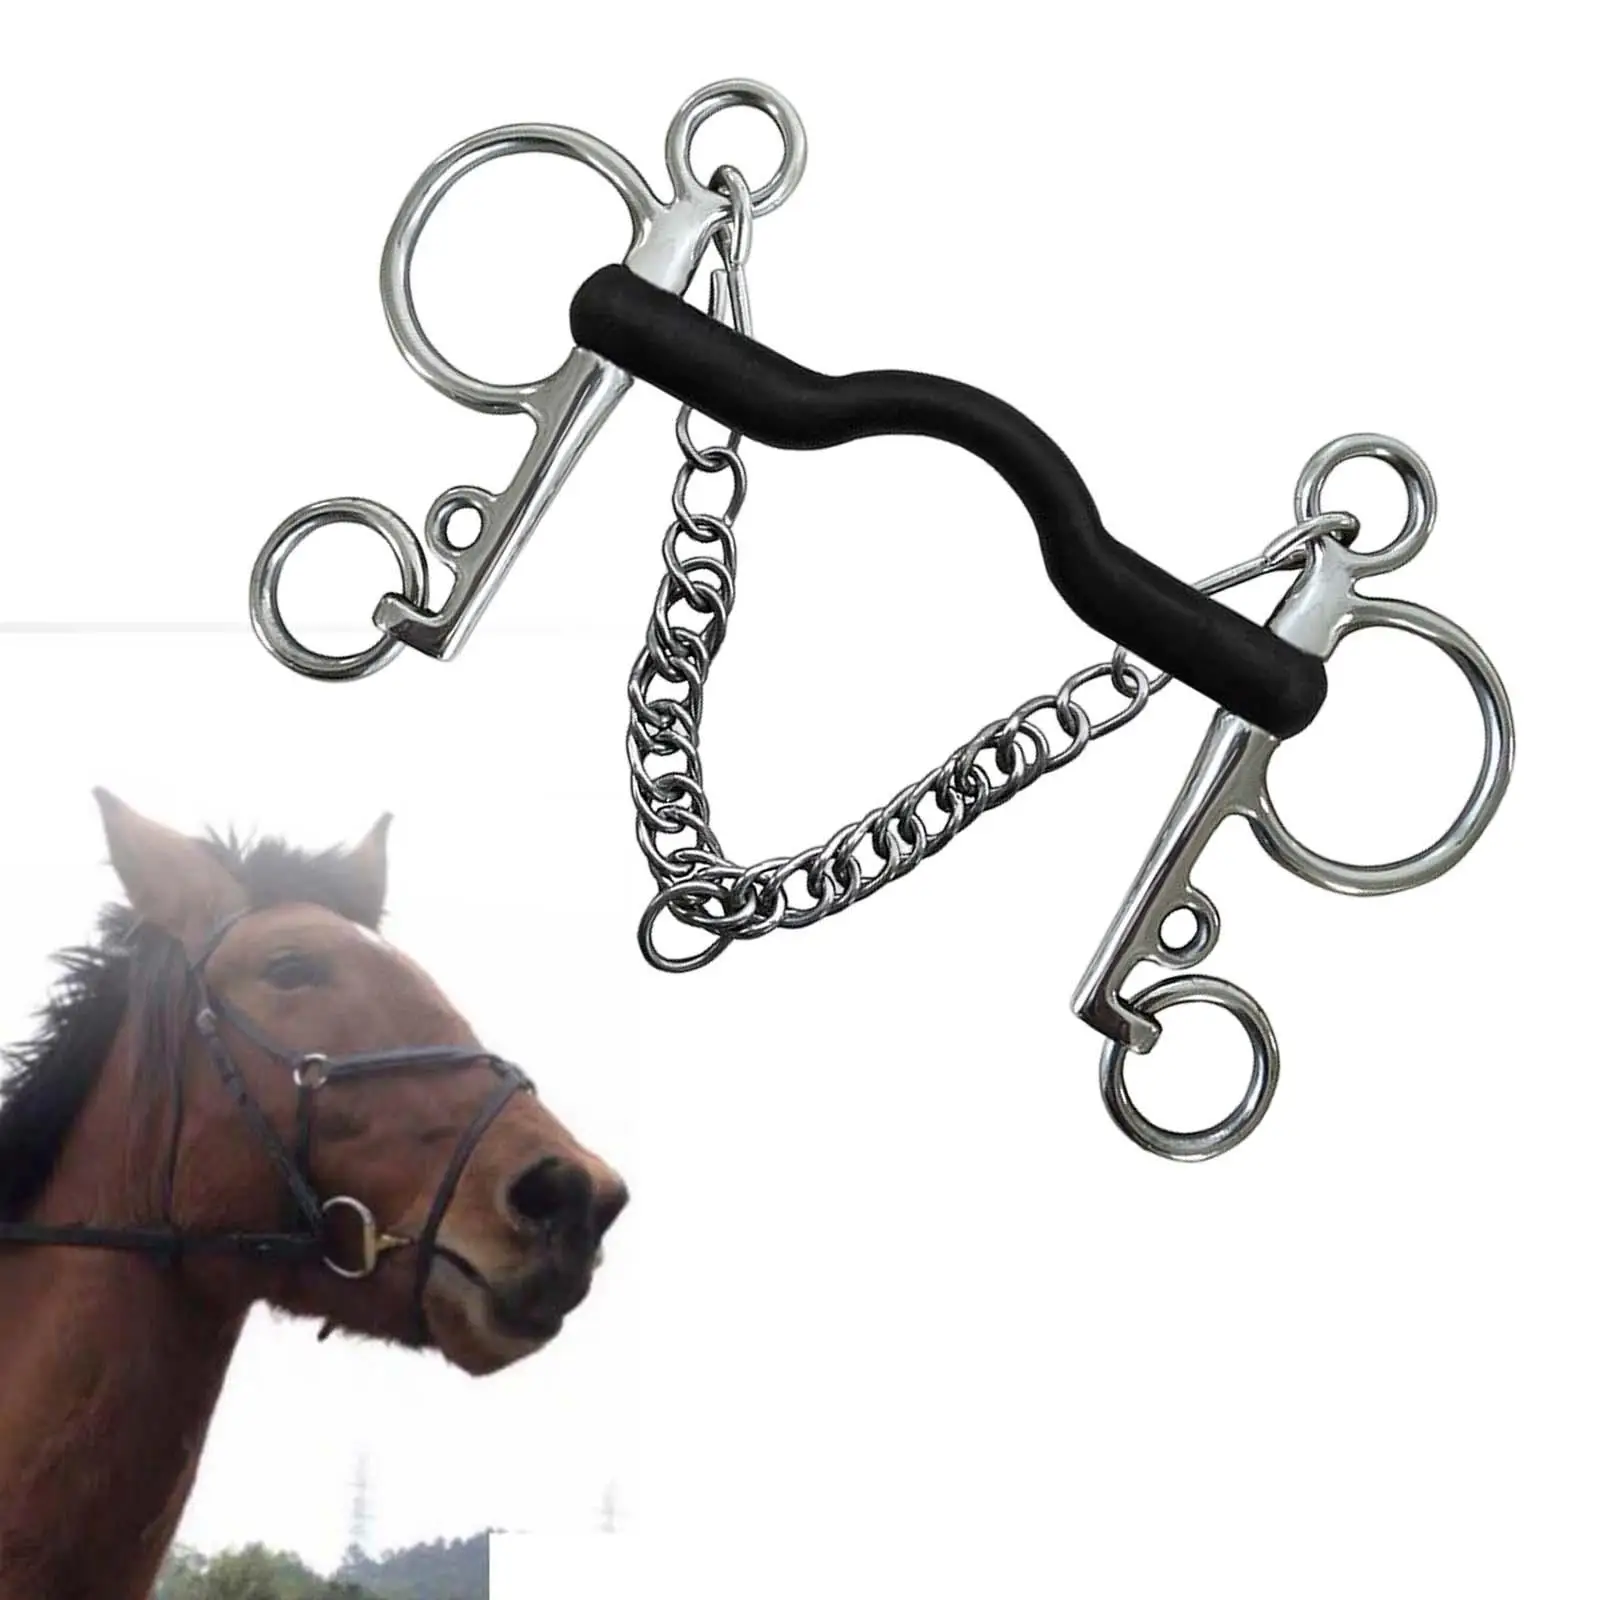 Horse Bit Cheek with Silver Trims Harness for Training Equipment Performance